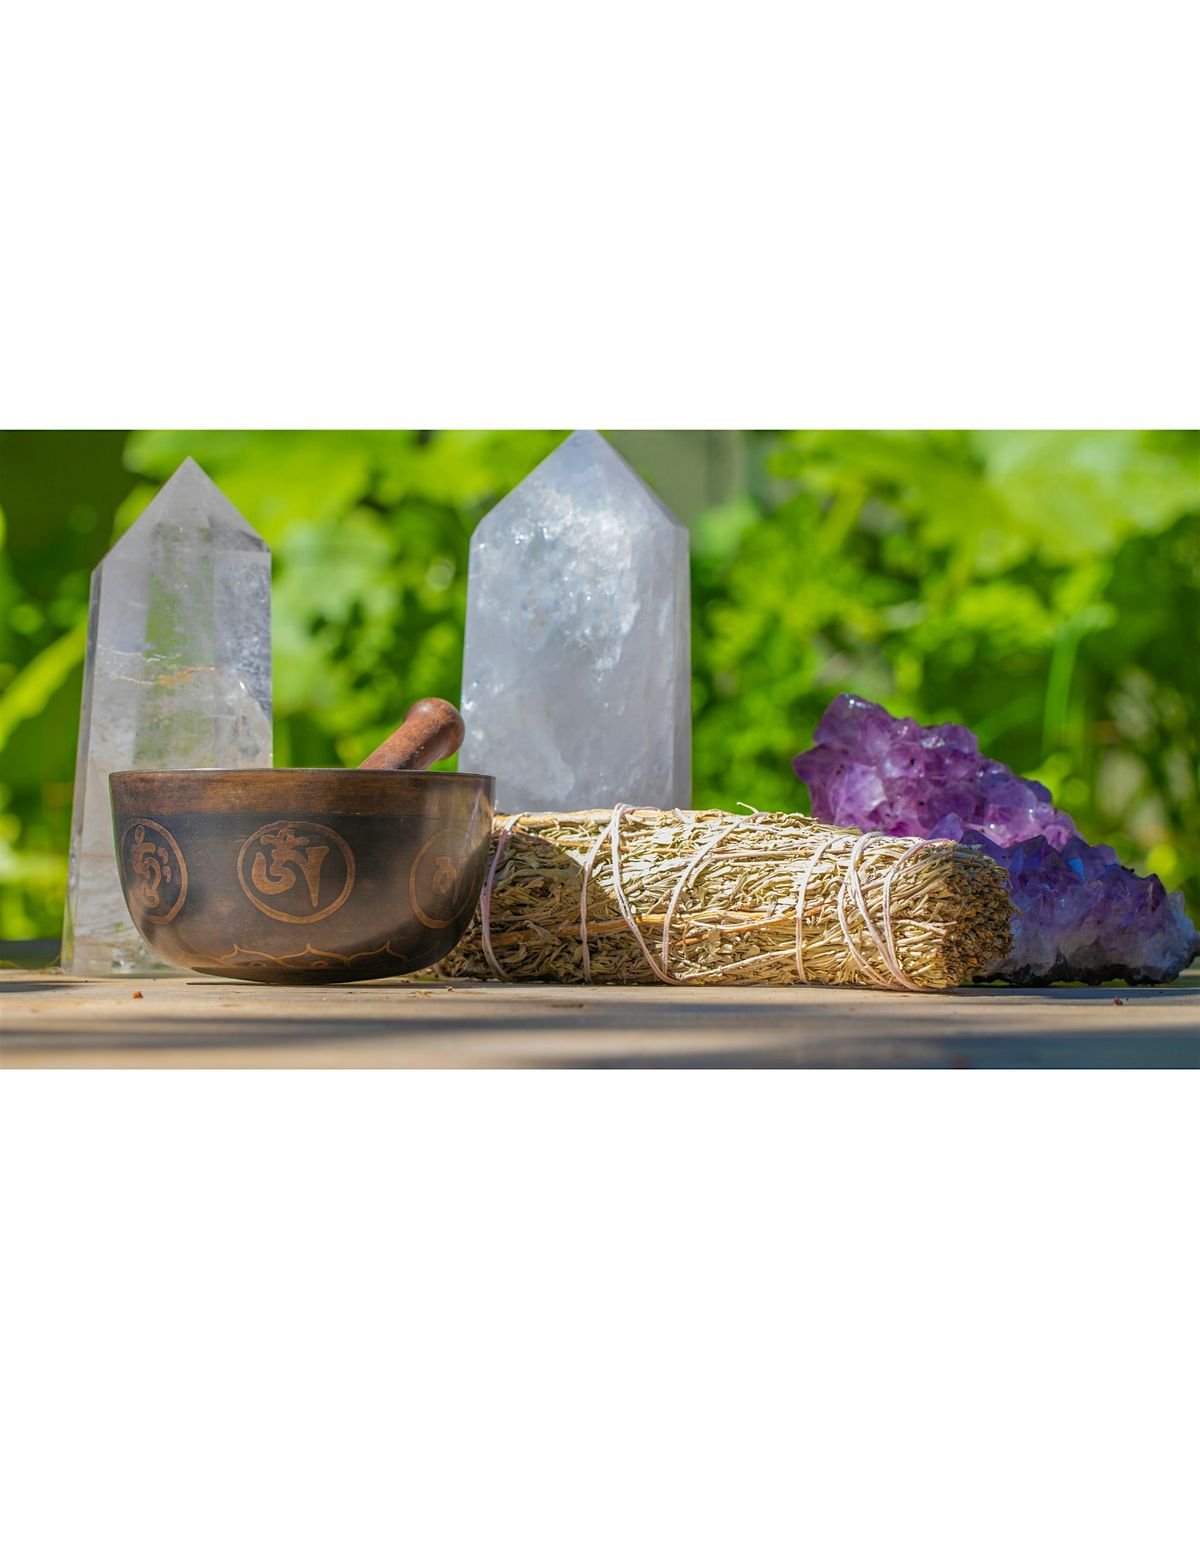 Aligning with your Inner truth and HigherSelf : Energy work and Sound Bath